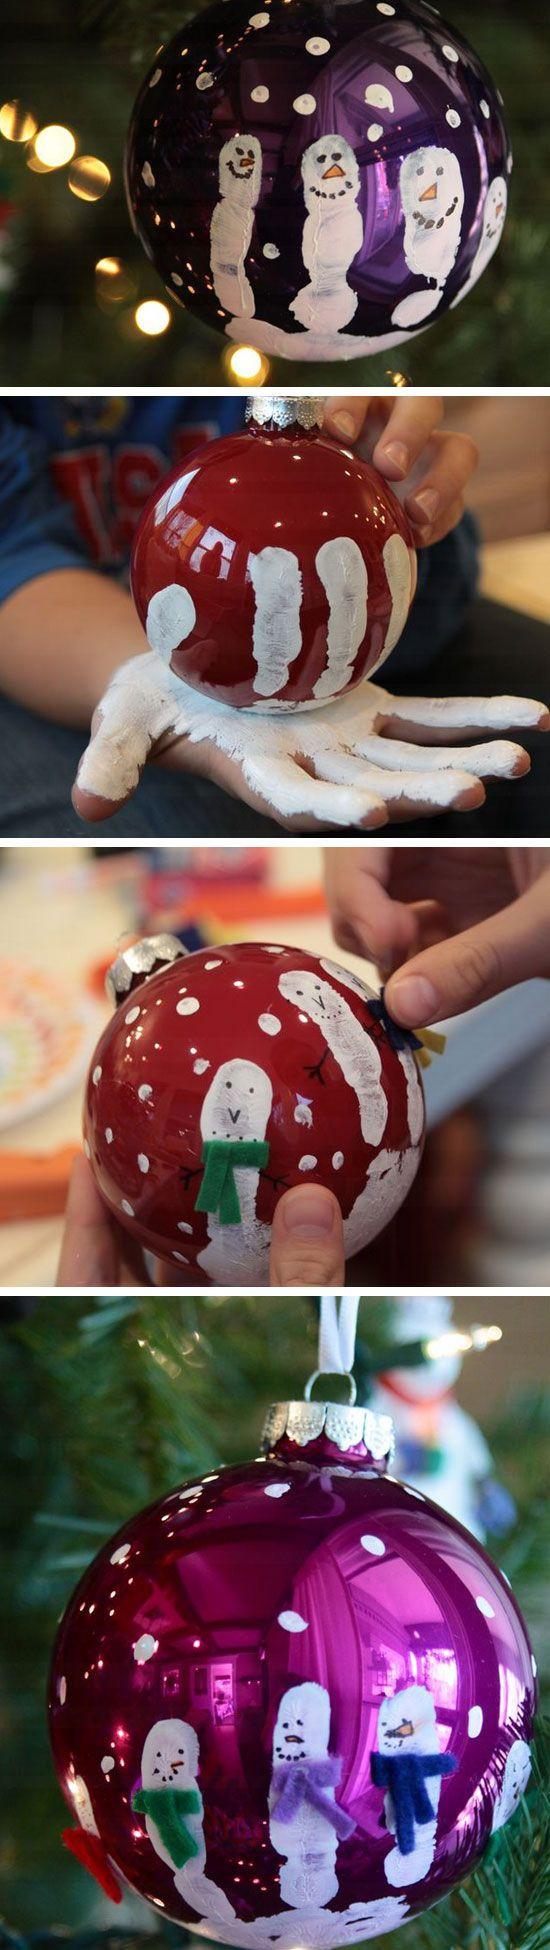 DIY Christmas Crafts For Toddlers
 Easy and Cute DIY Christmas Crafts for Kids to Make Hative